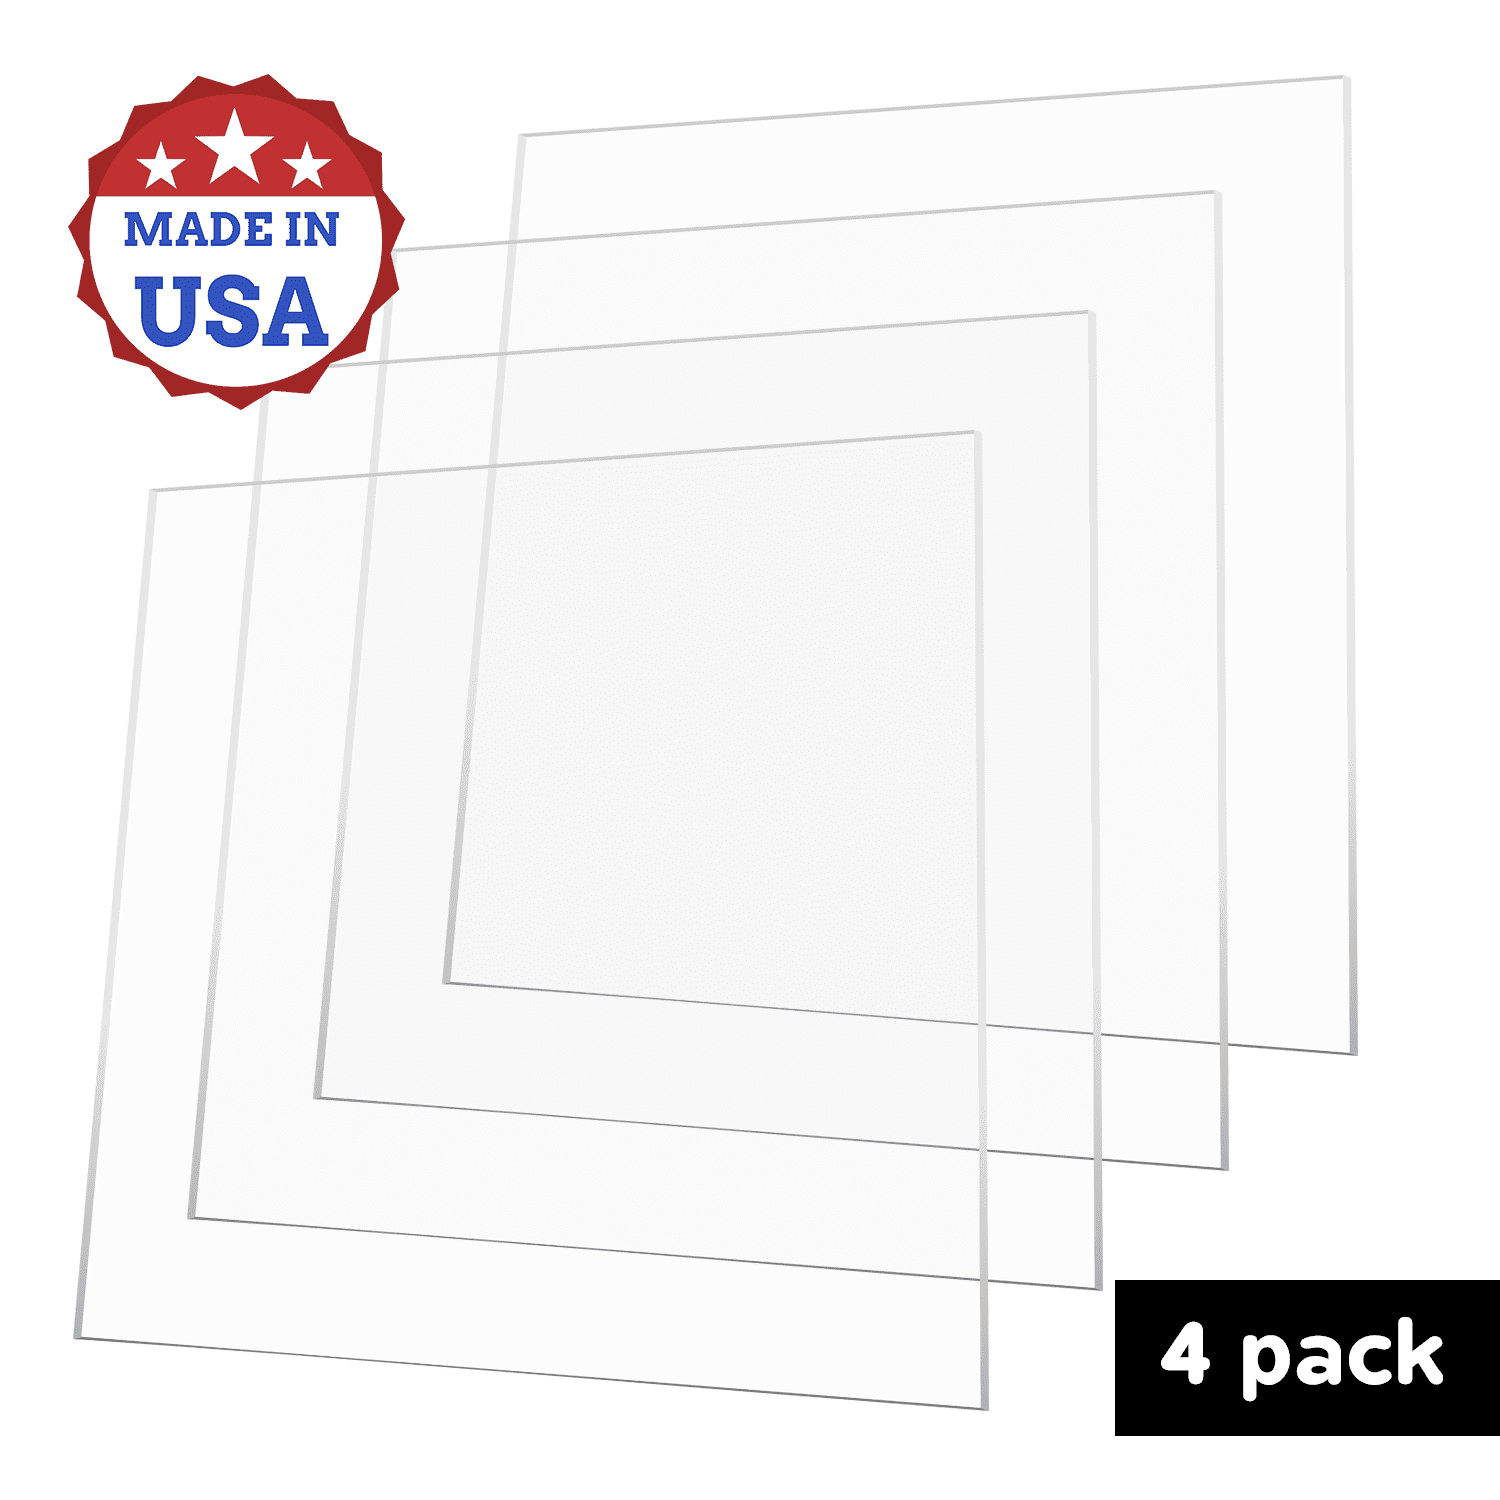 Acrylic Paper Pads (Set of 2), 12 Acrylic Sheets 9x12 inch